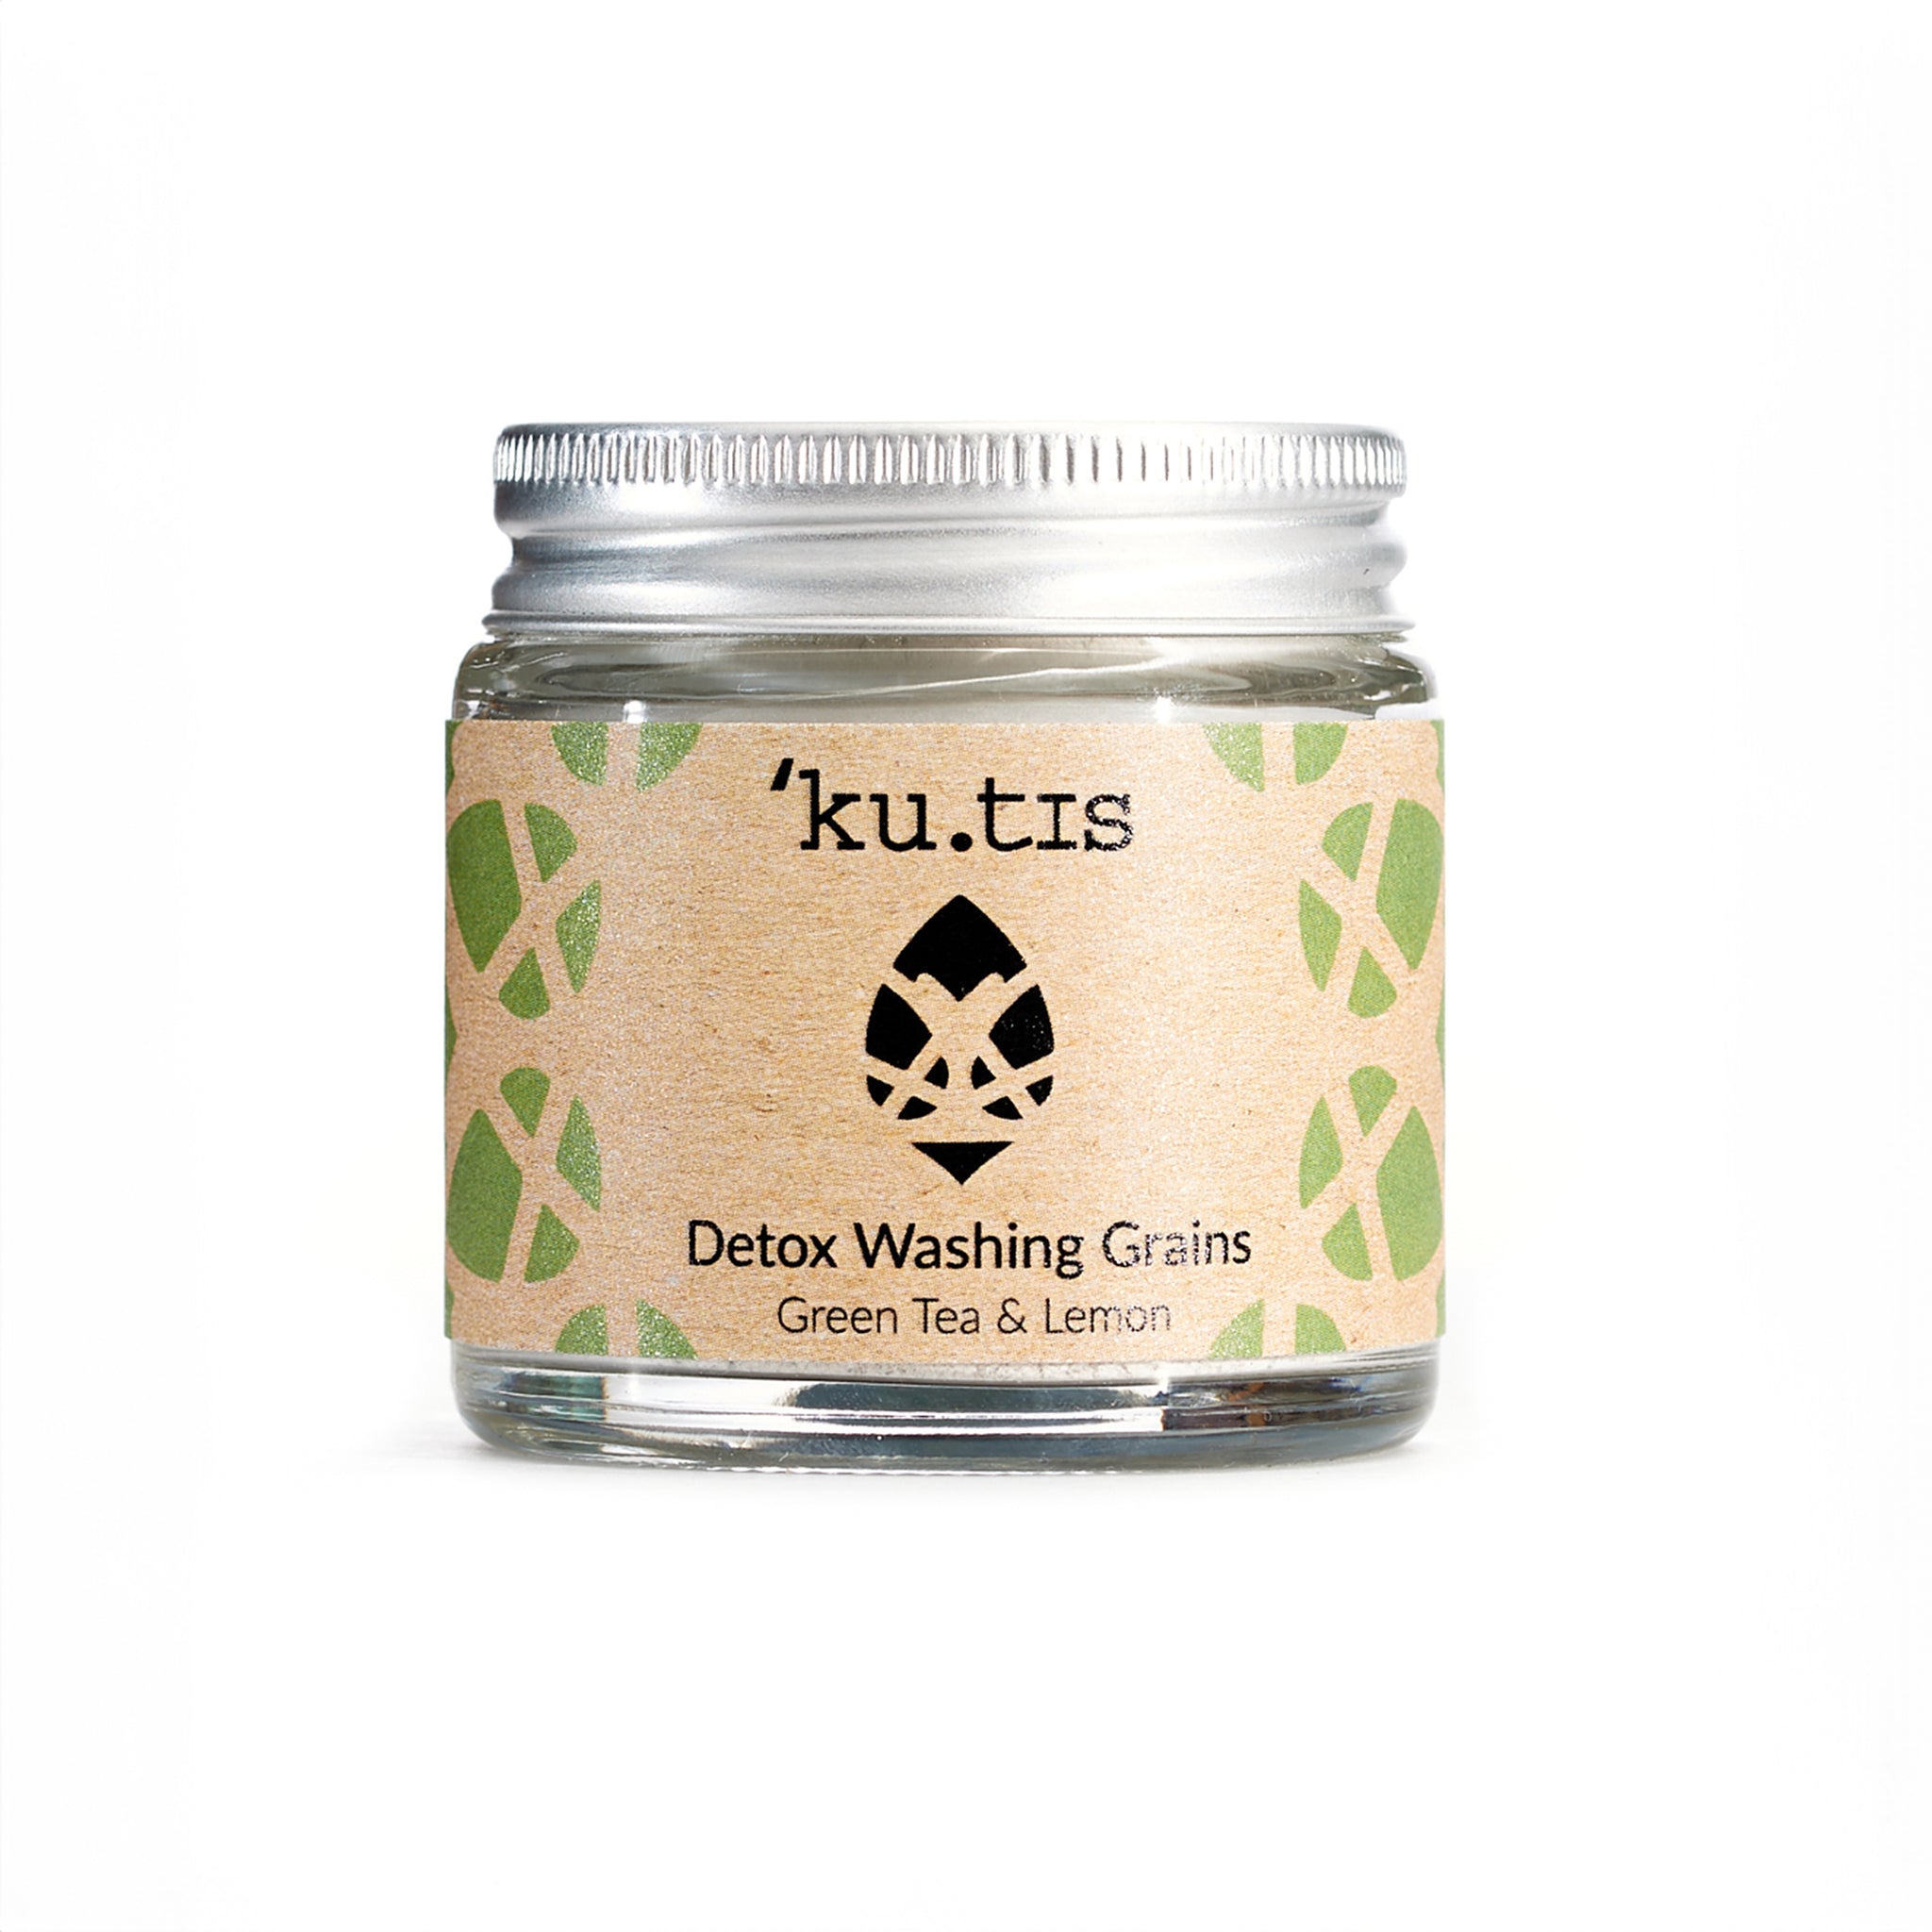 Natural detox washing grains in powder form in a glass jar with an aluminium screw top silver lid.